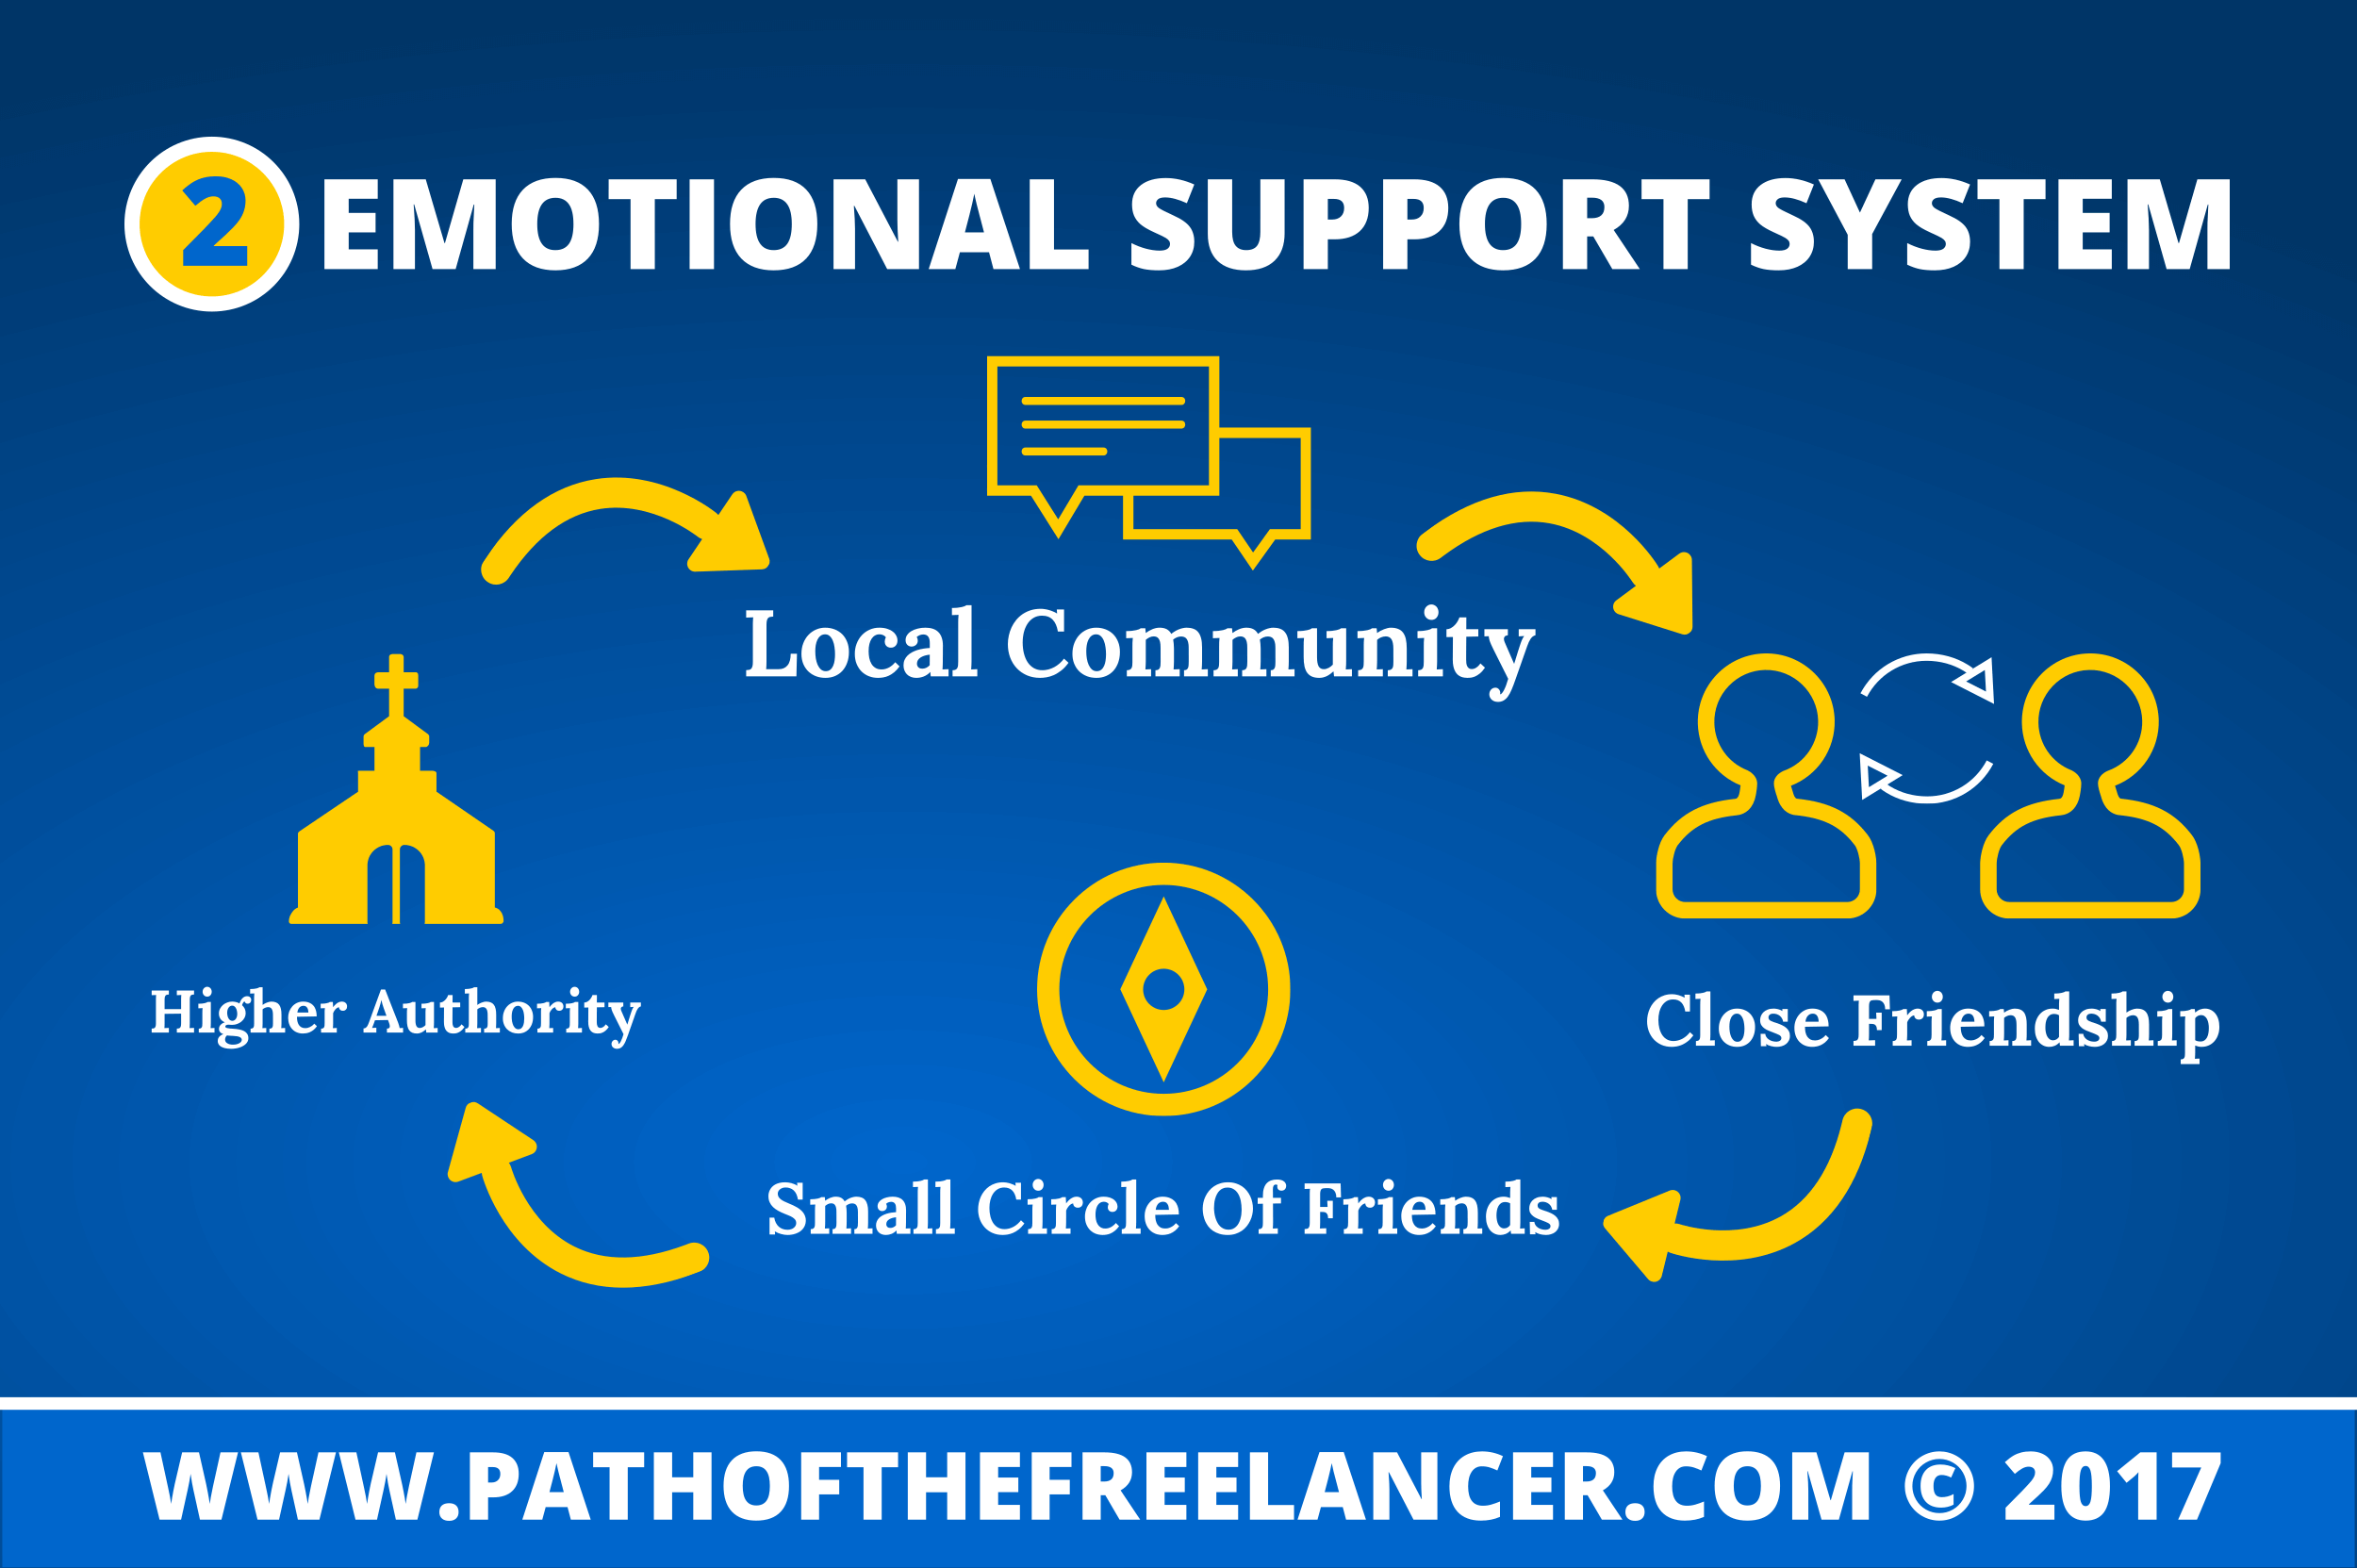 Emotional Support System Infographic